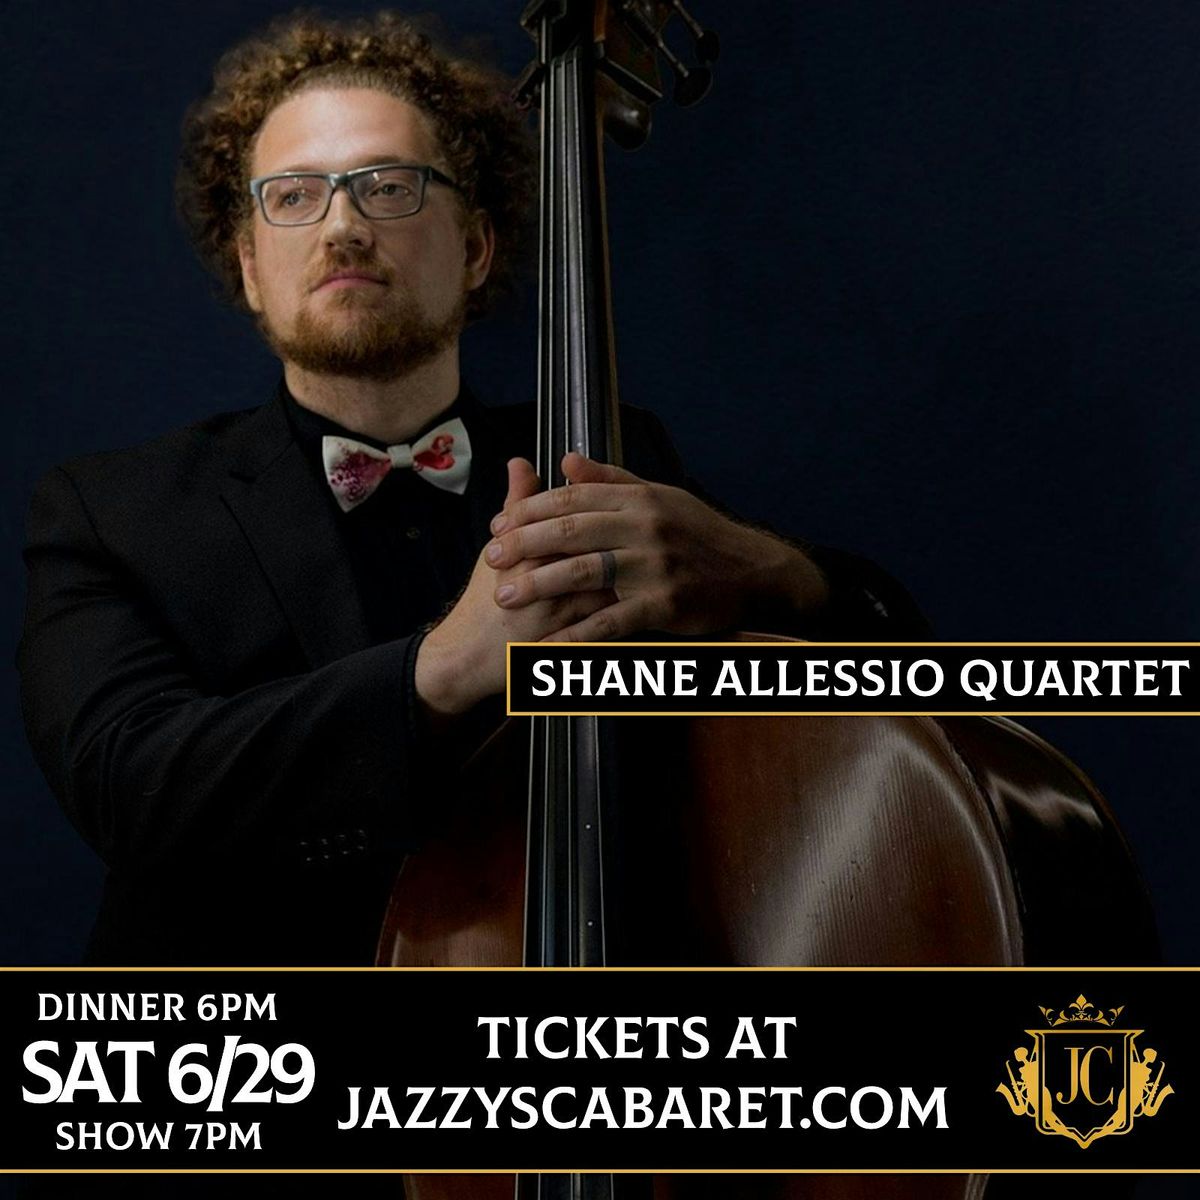 JAZZ IN THE CITY Presents: The Shane Allessio Quartet